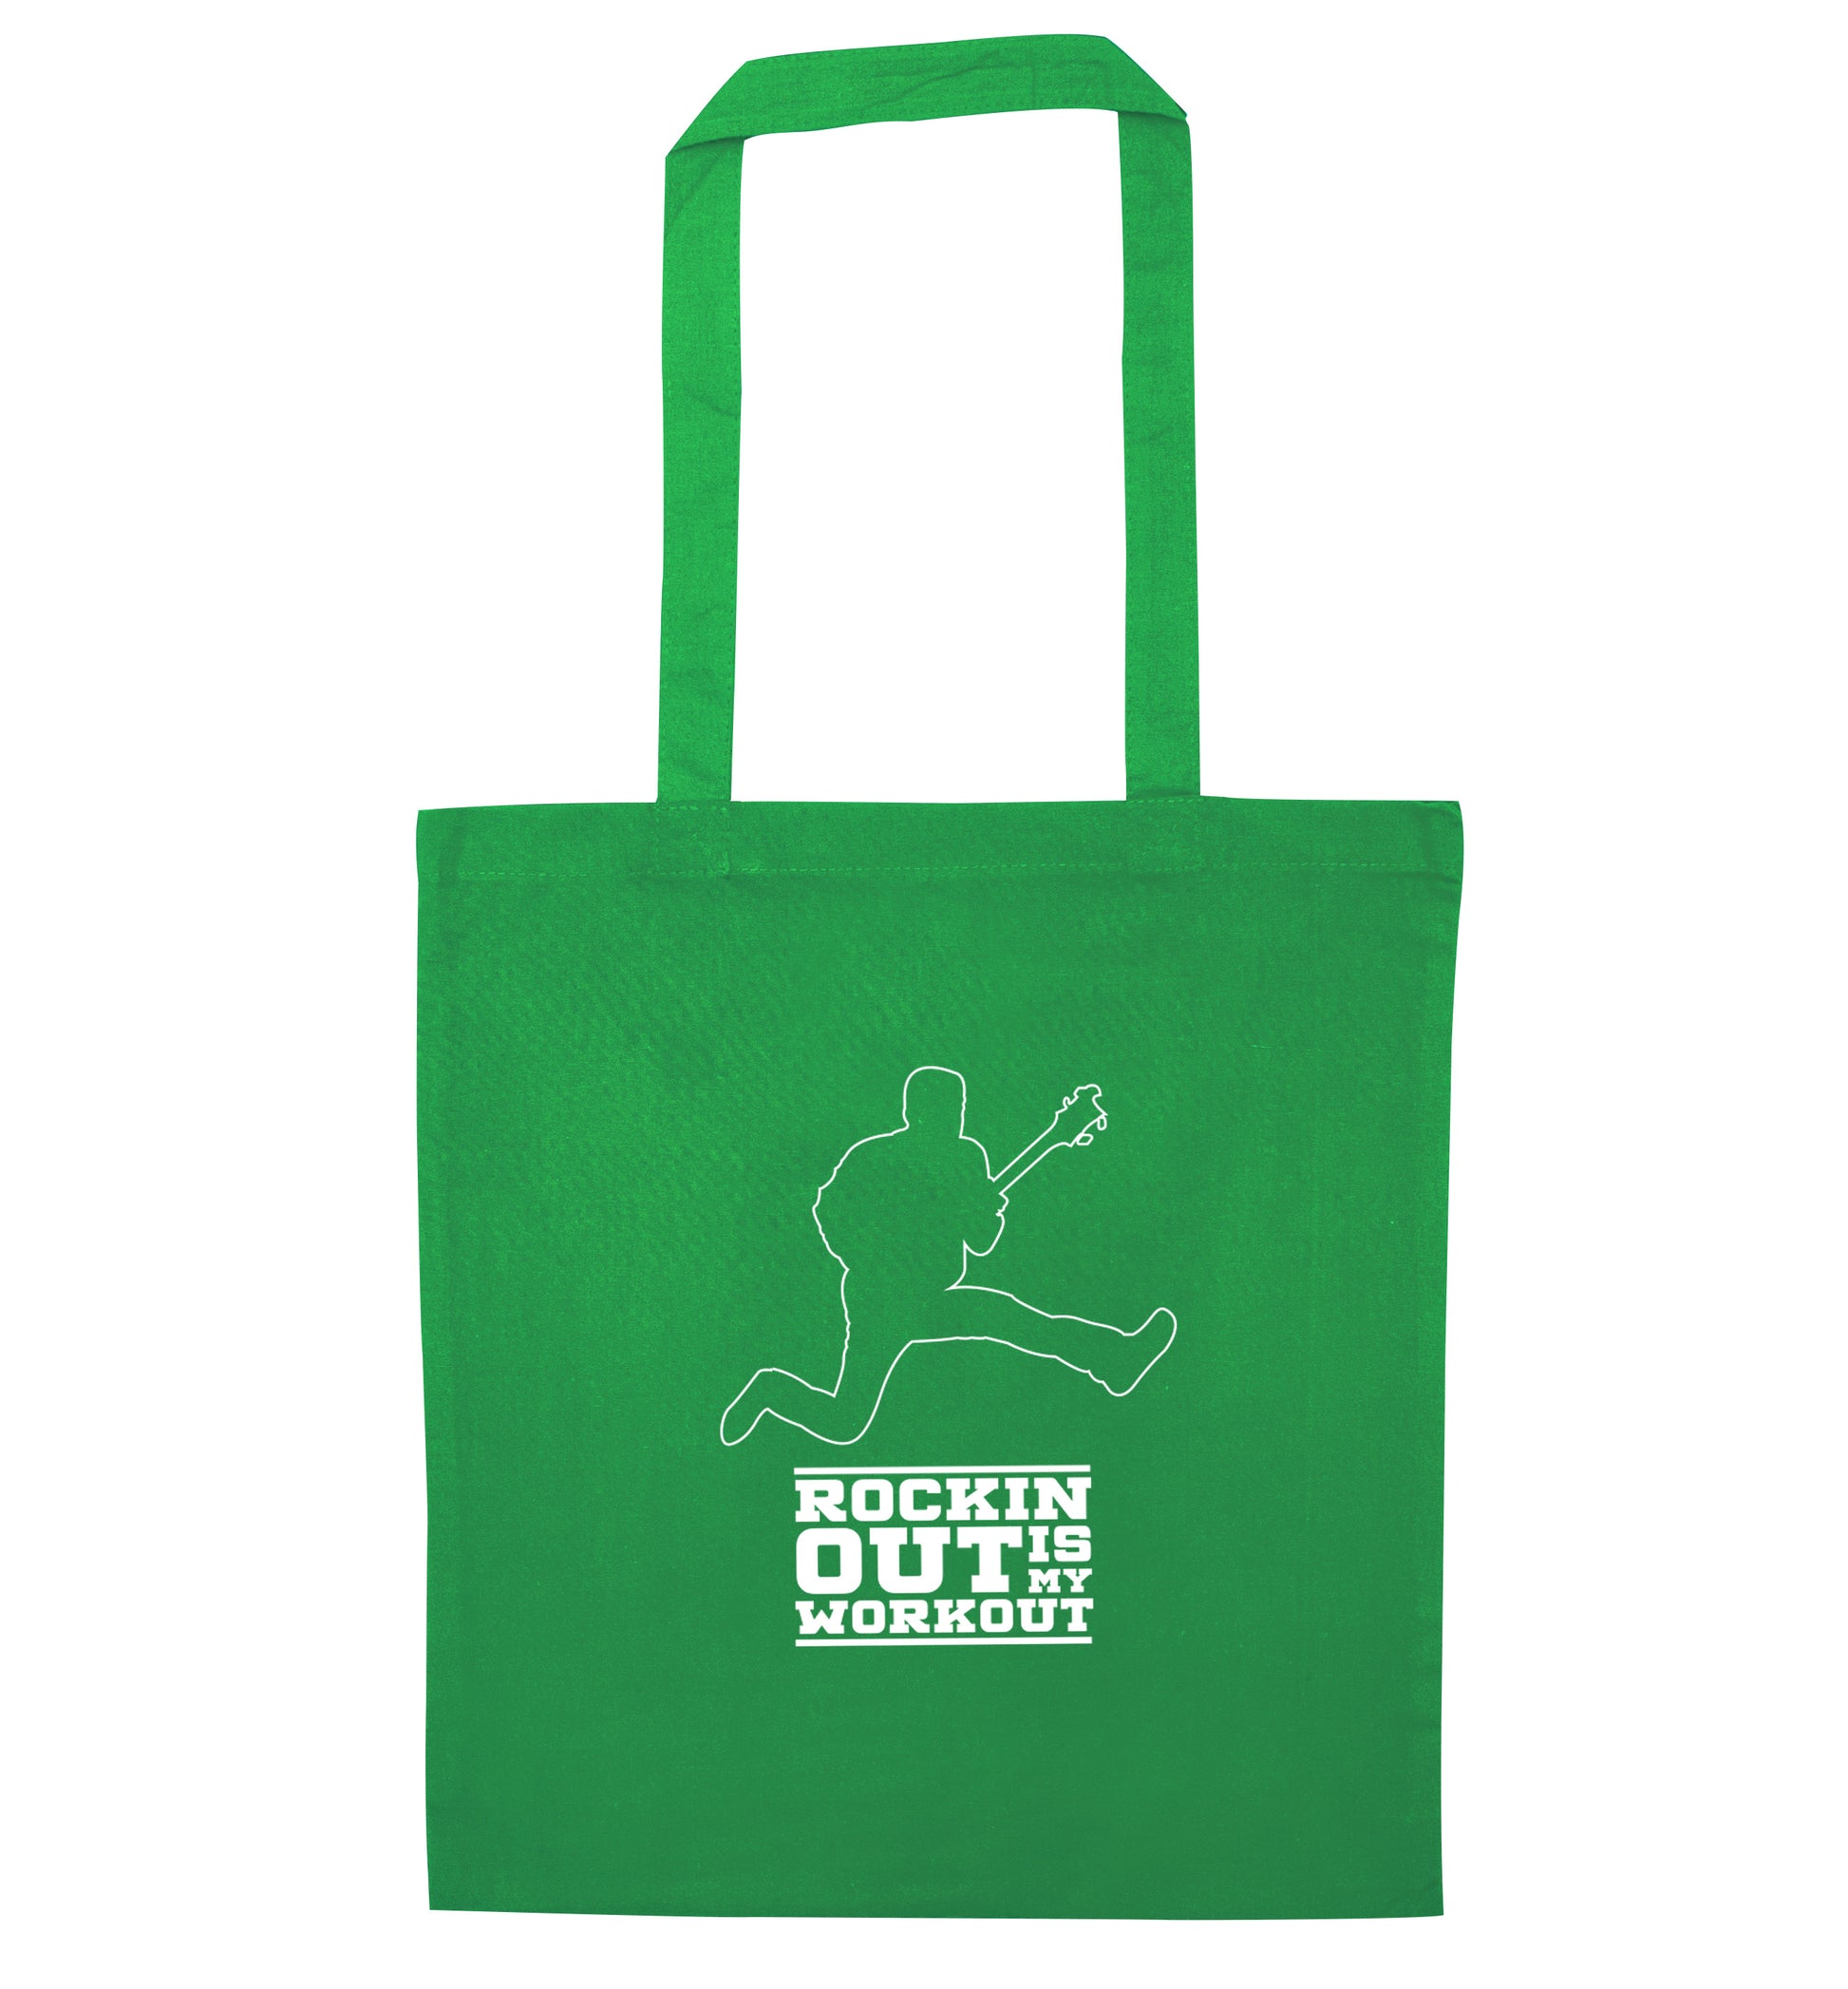 Rockin out is my workout 2 green tote bag